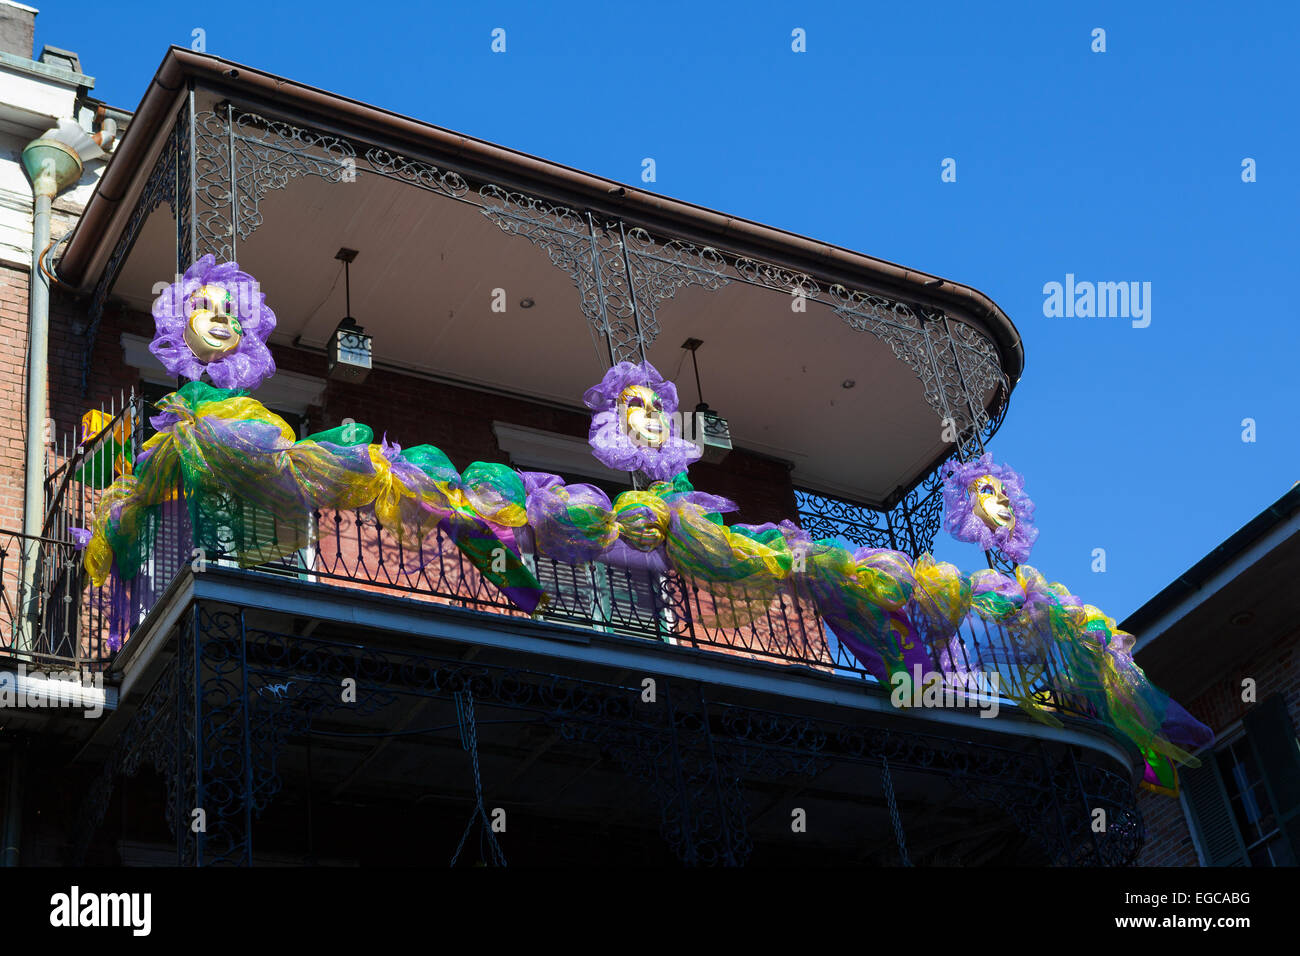 Mardi Gras Decorations on balcony in the French Quarter, New Orleans, Louisiana Stock Photo